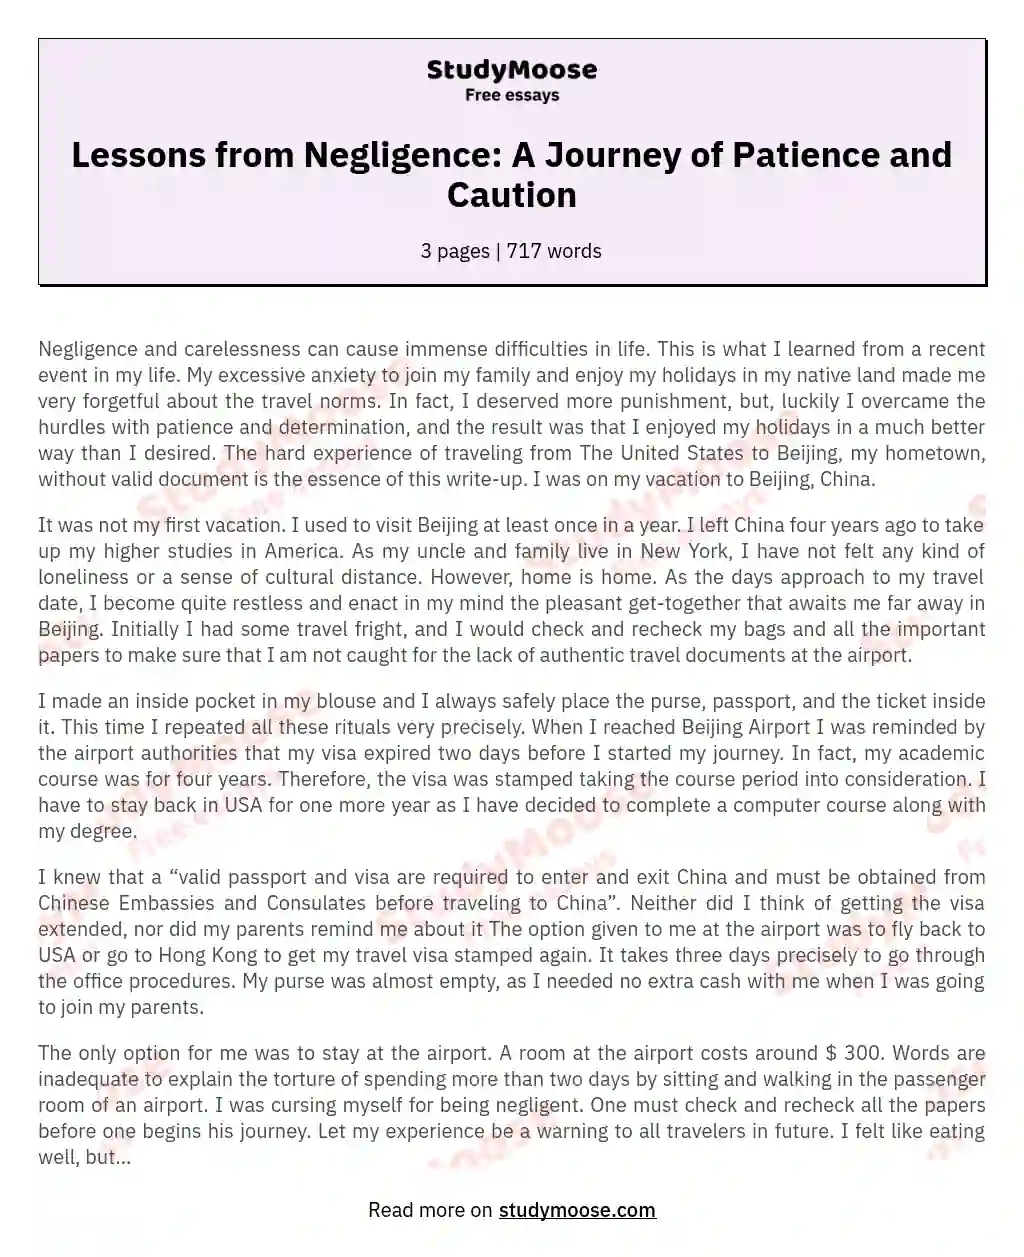 Lessons from Negligence: A Journey of Patience and Caution essay